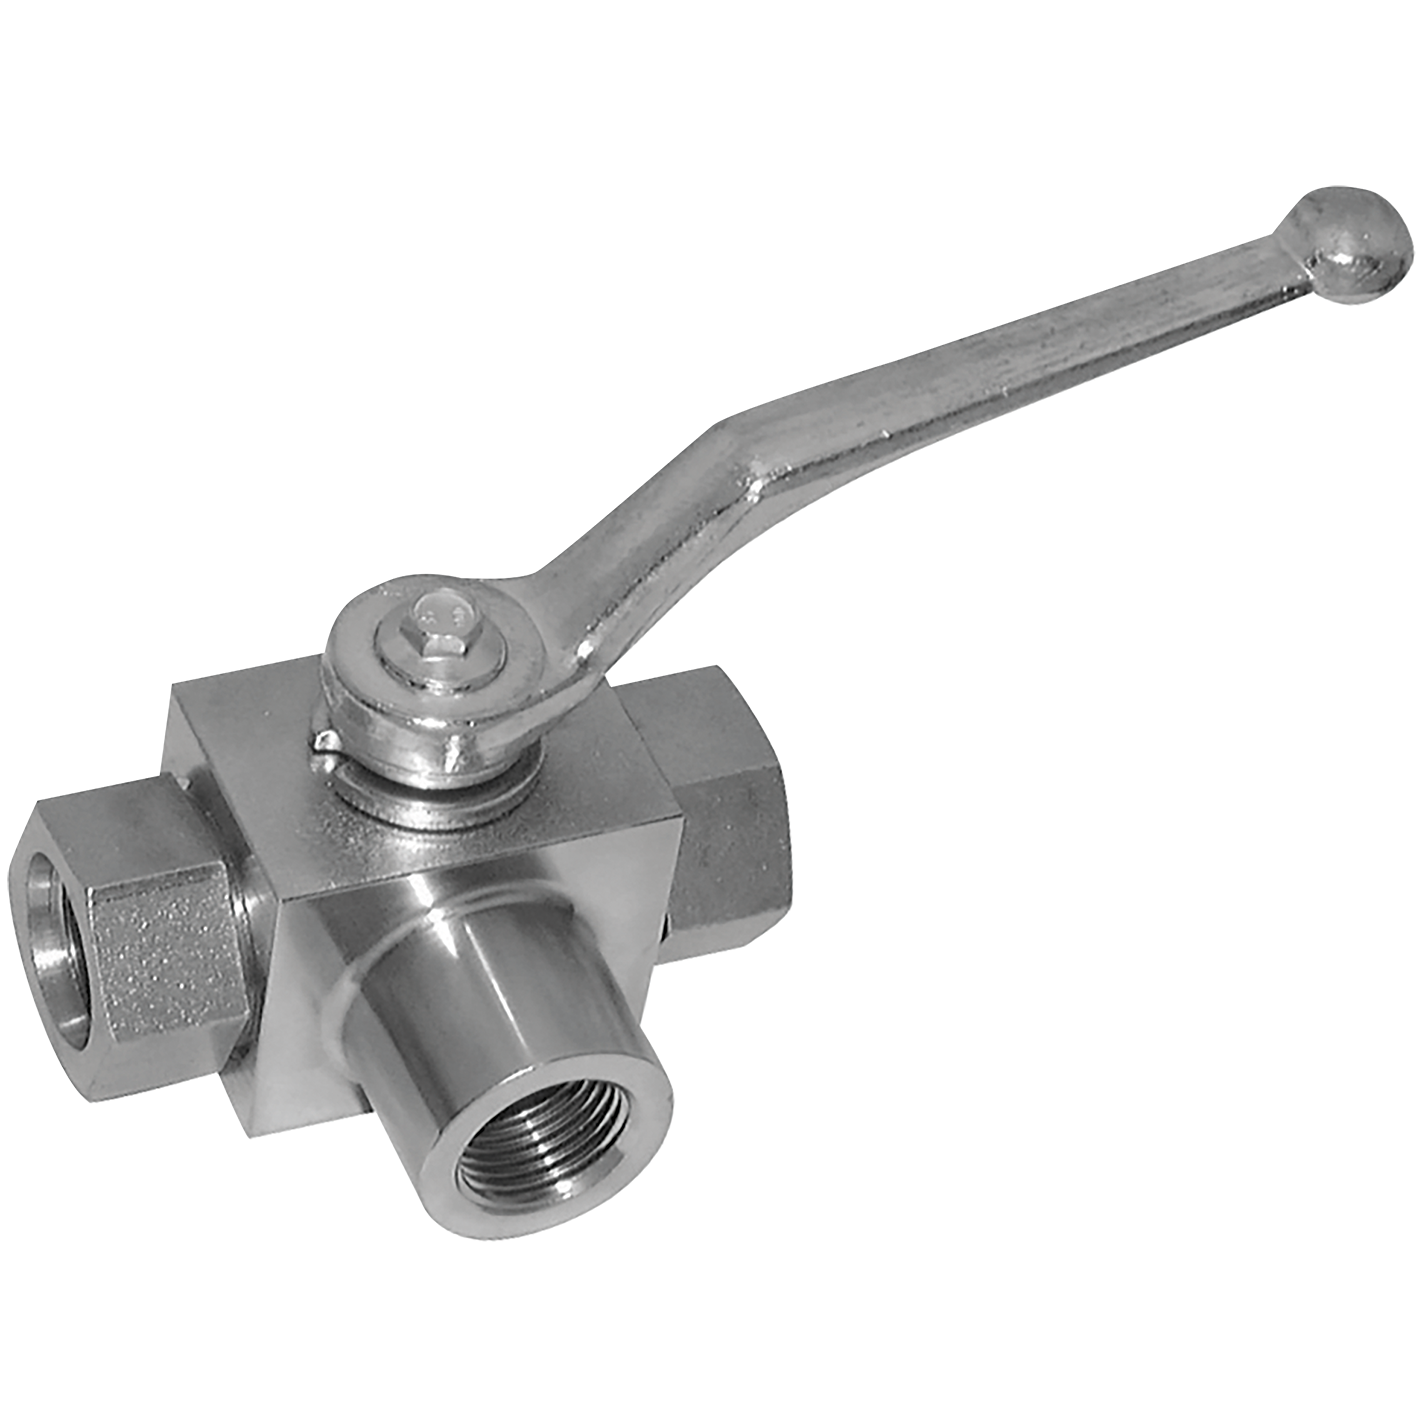 1.1/4" BSP Parallel Female 3 Way T Ported Ball Valve